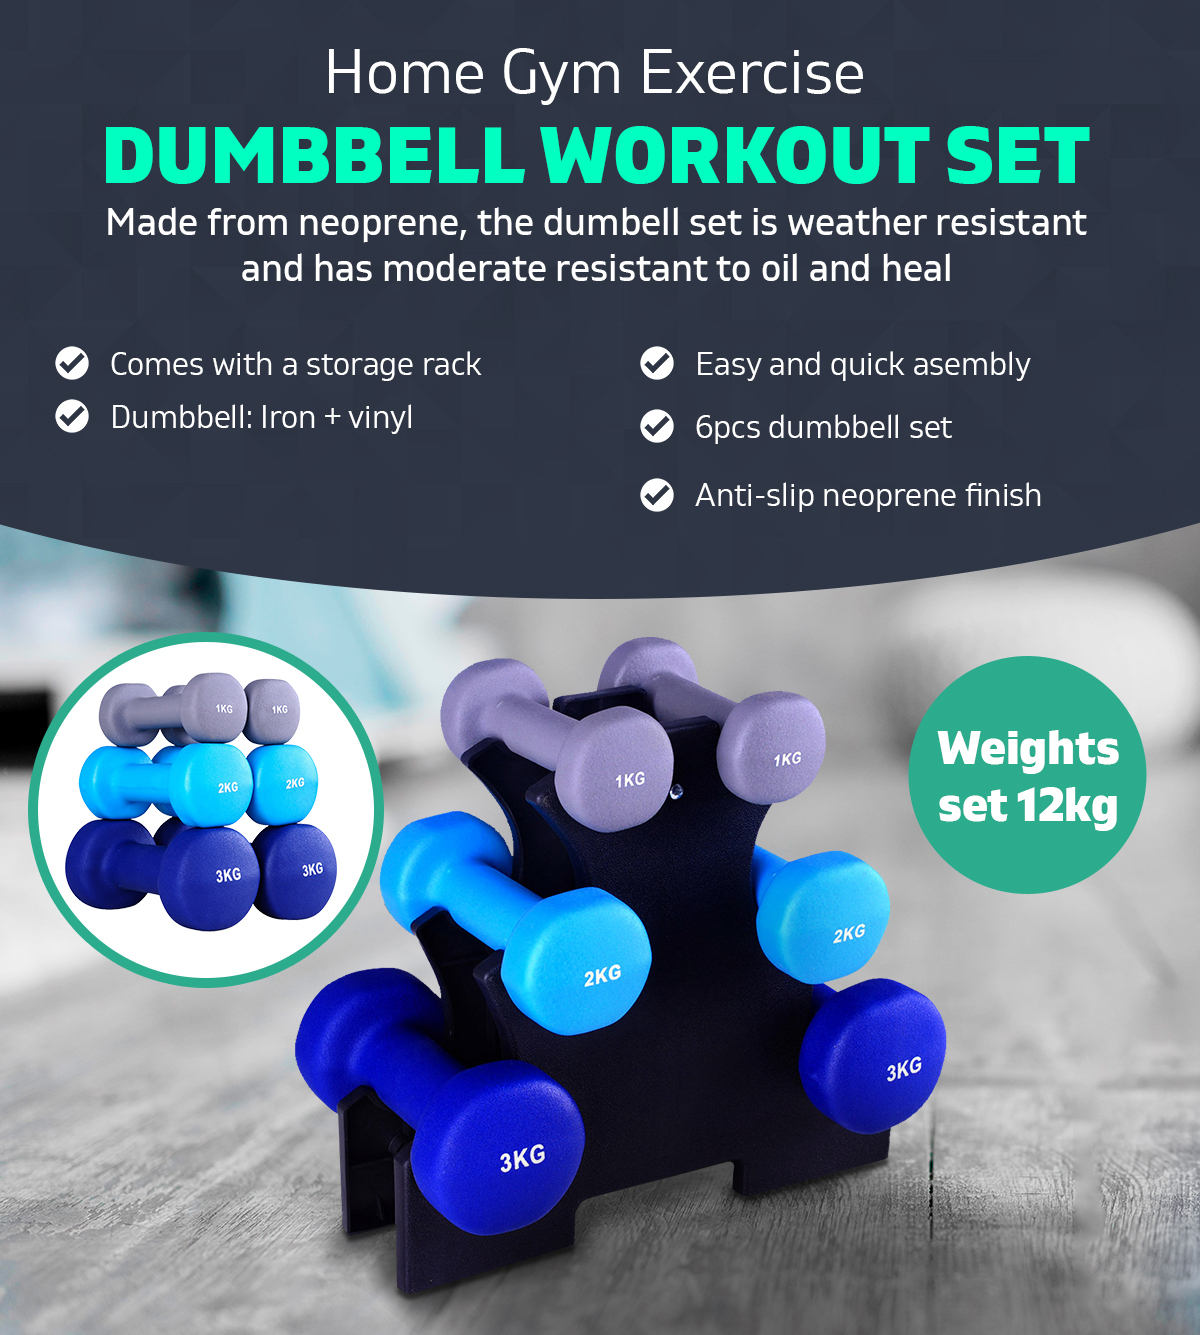 6 Piece Fitness Dumbbell Workout Weights Set 12kg with Stand Exercise Home Gym